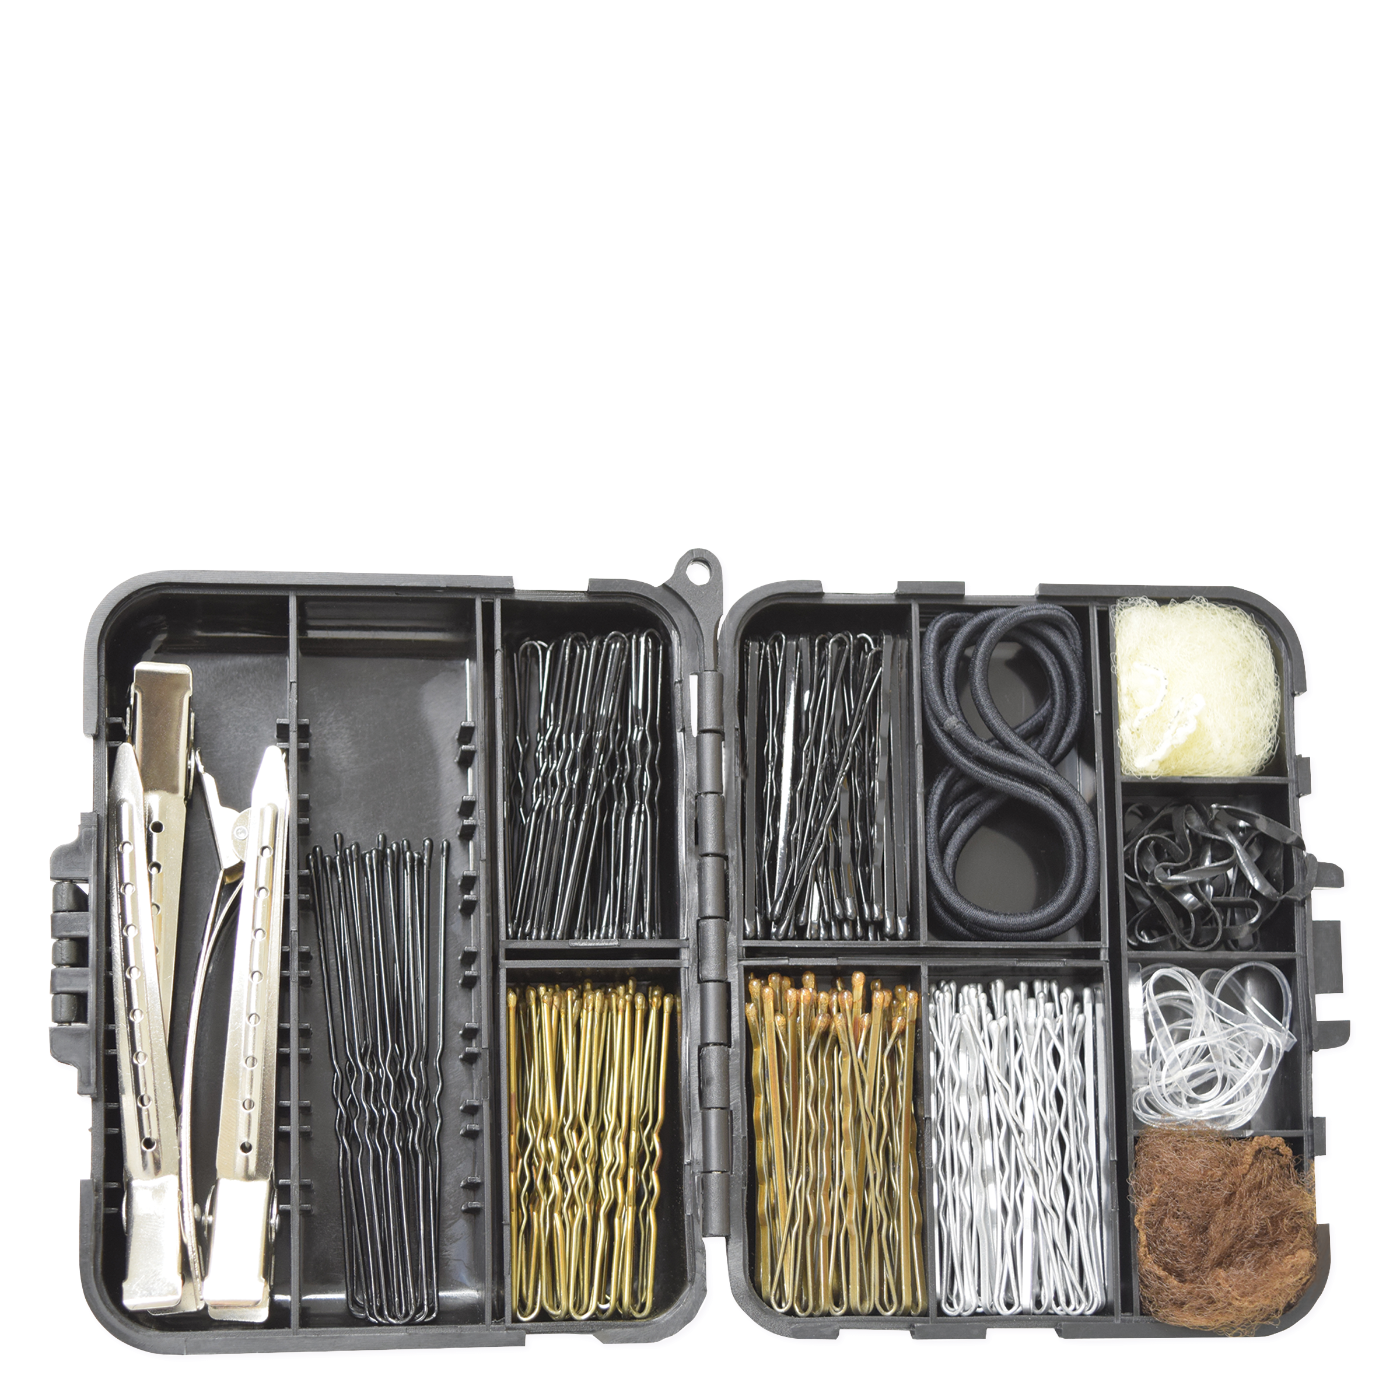 Hair Accessory Kit with Organizer Case